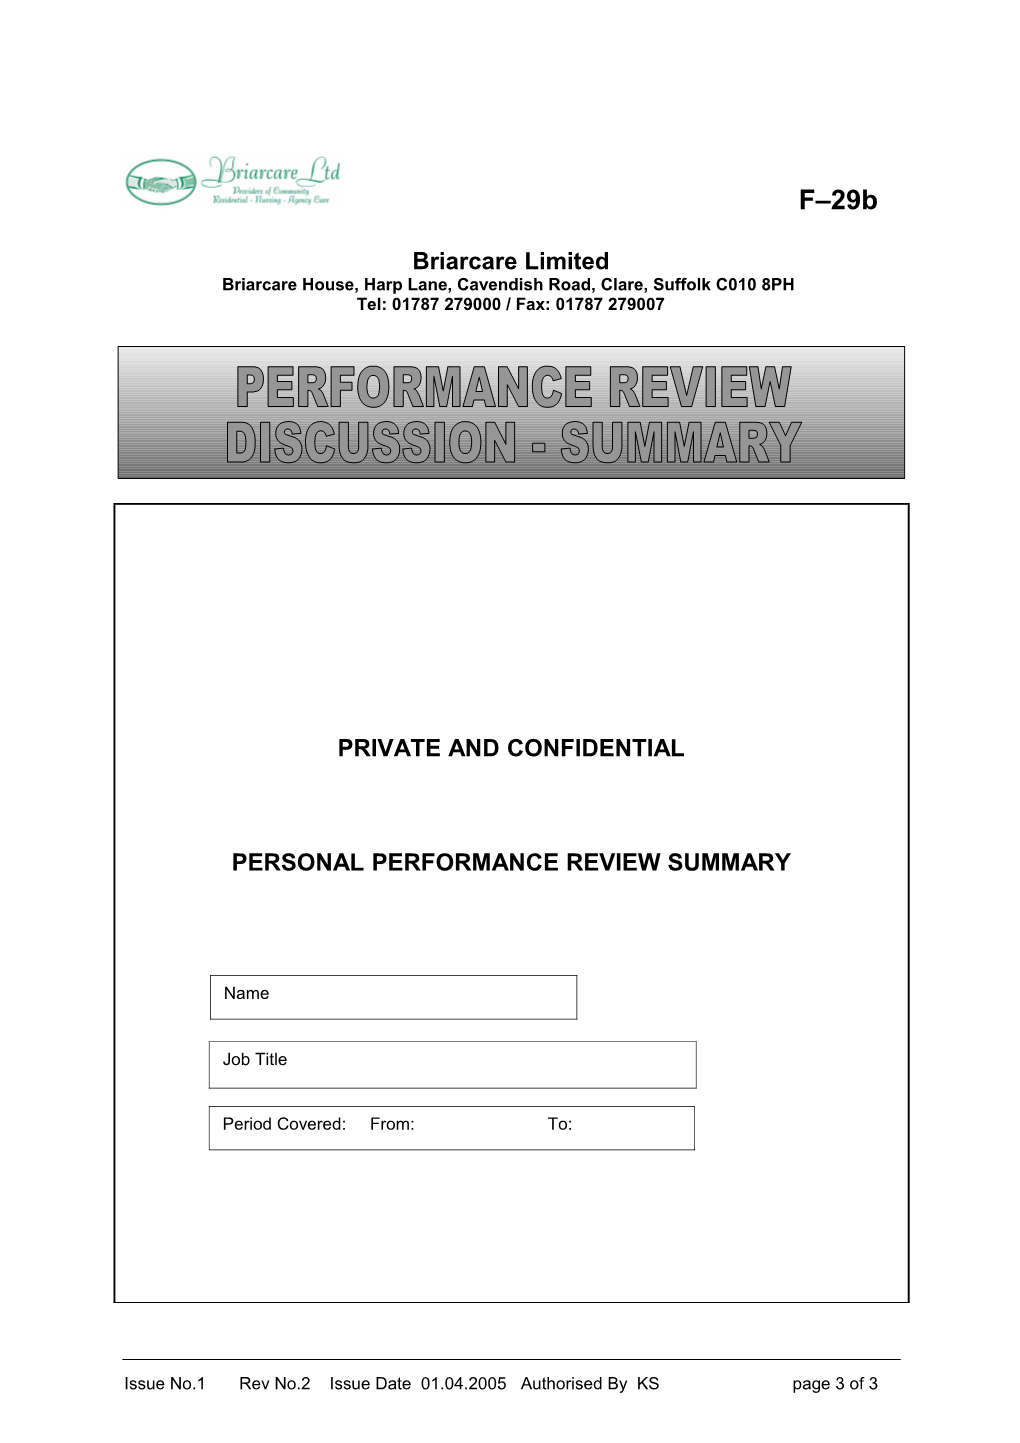 Performance Review - Summary